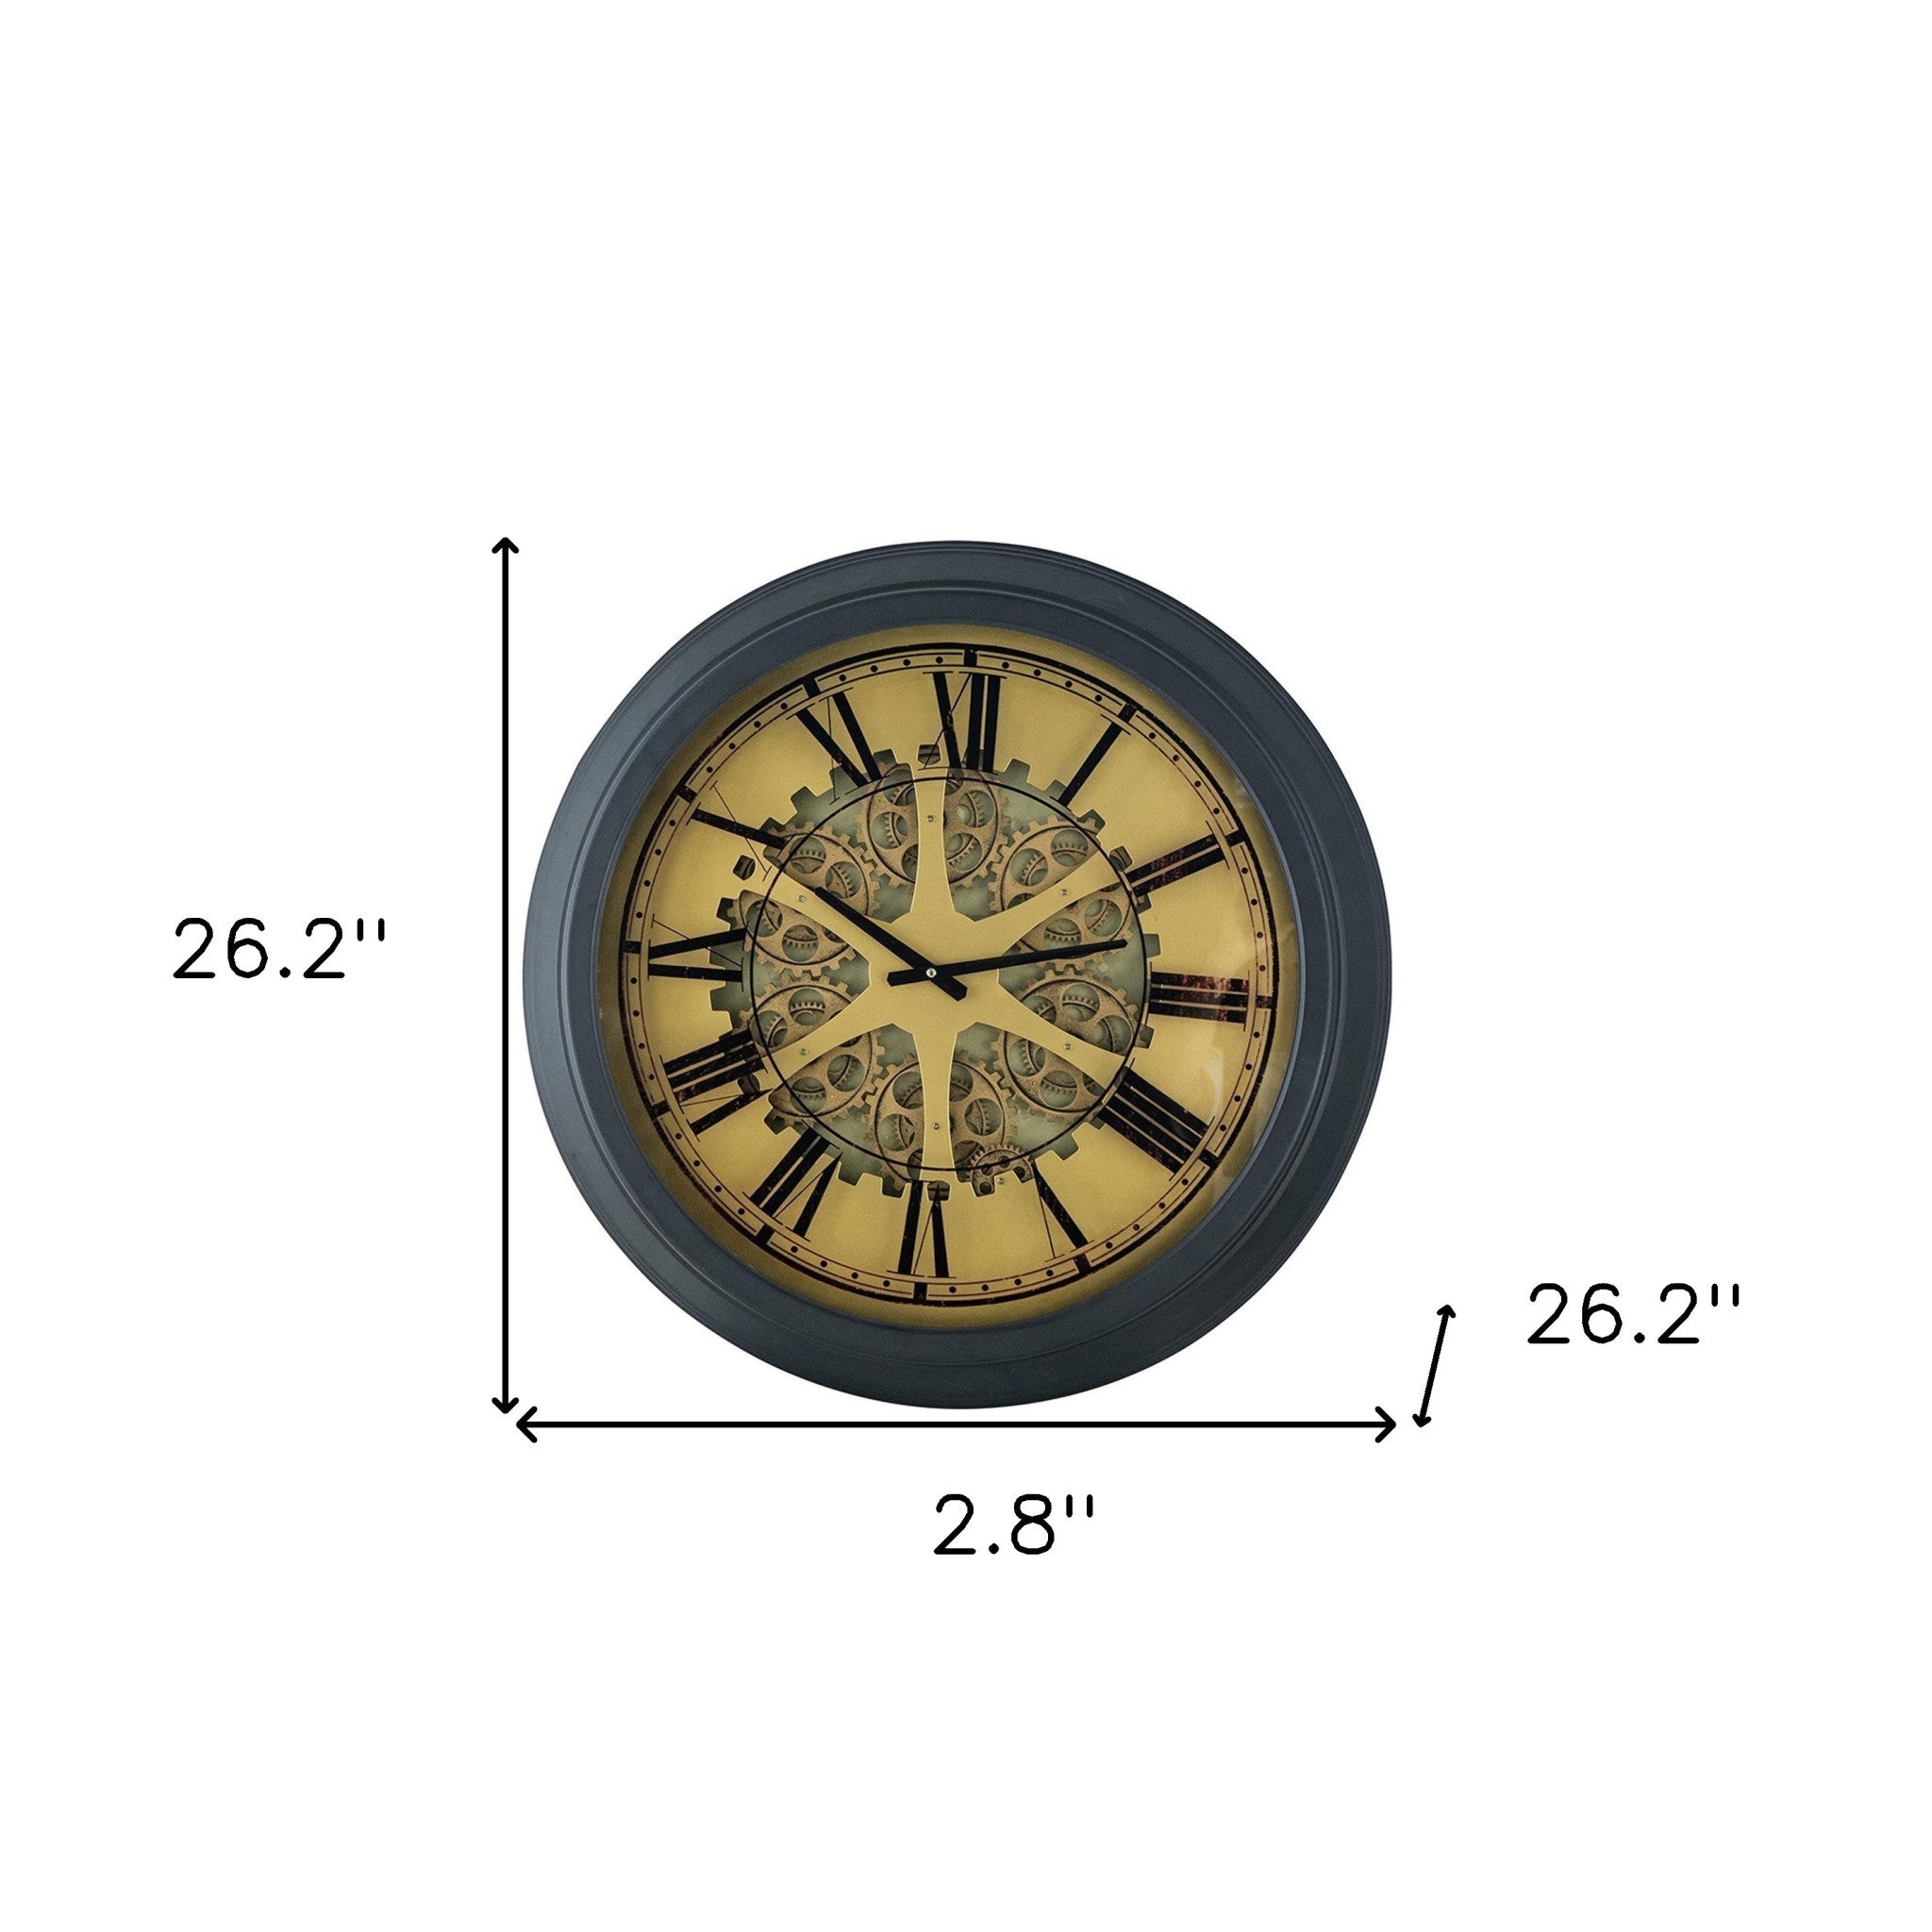 Black and Copper Exposed Gears Round Wall Clock